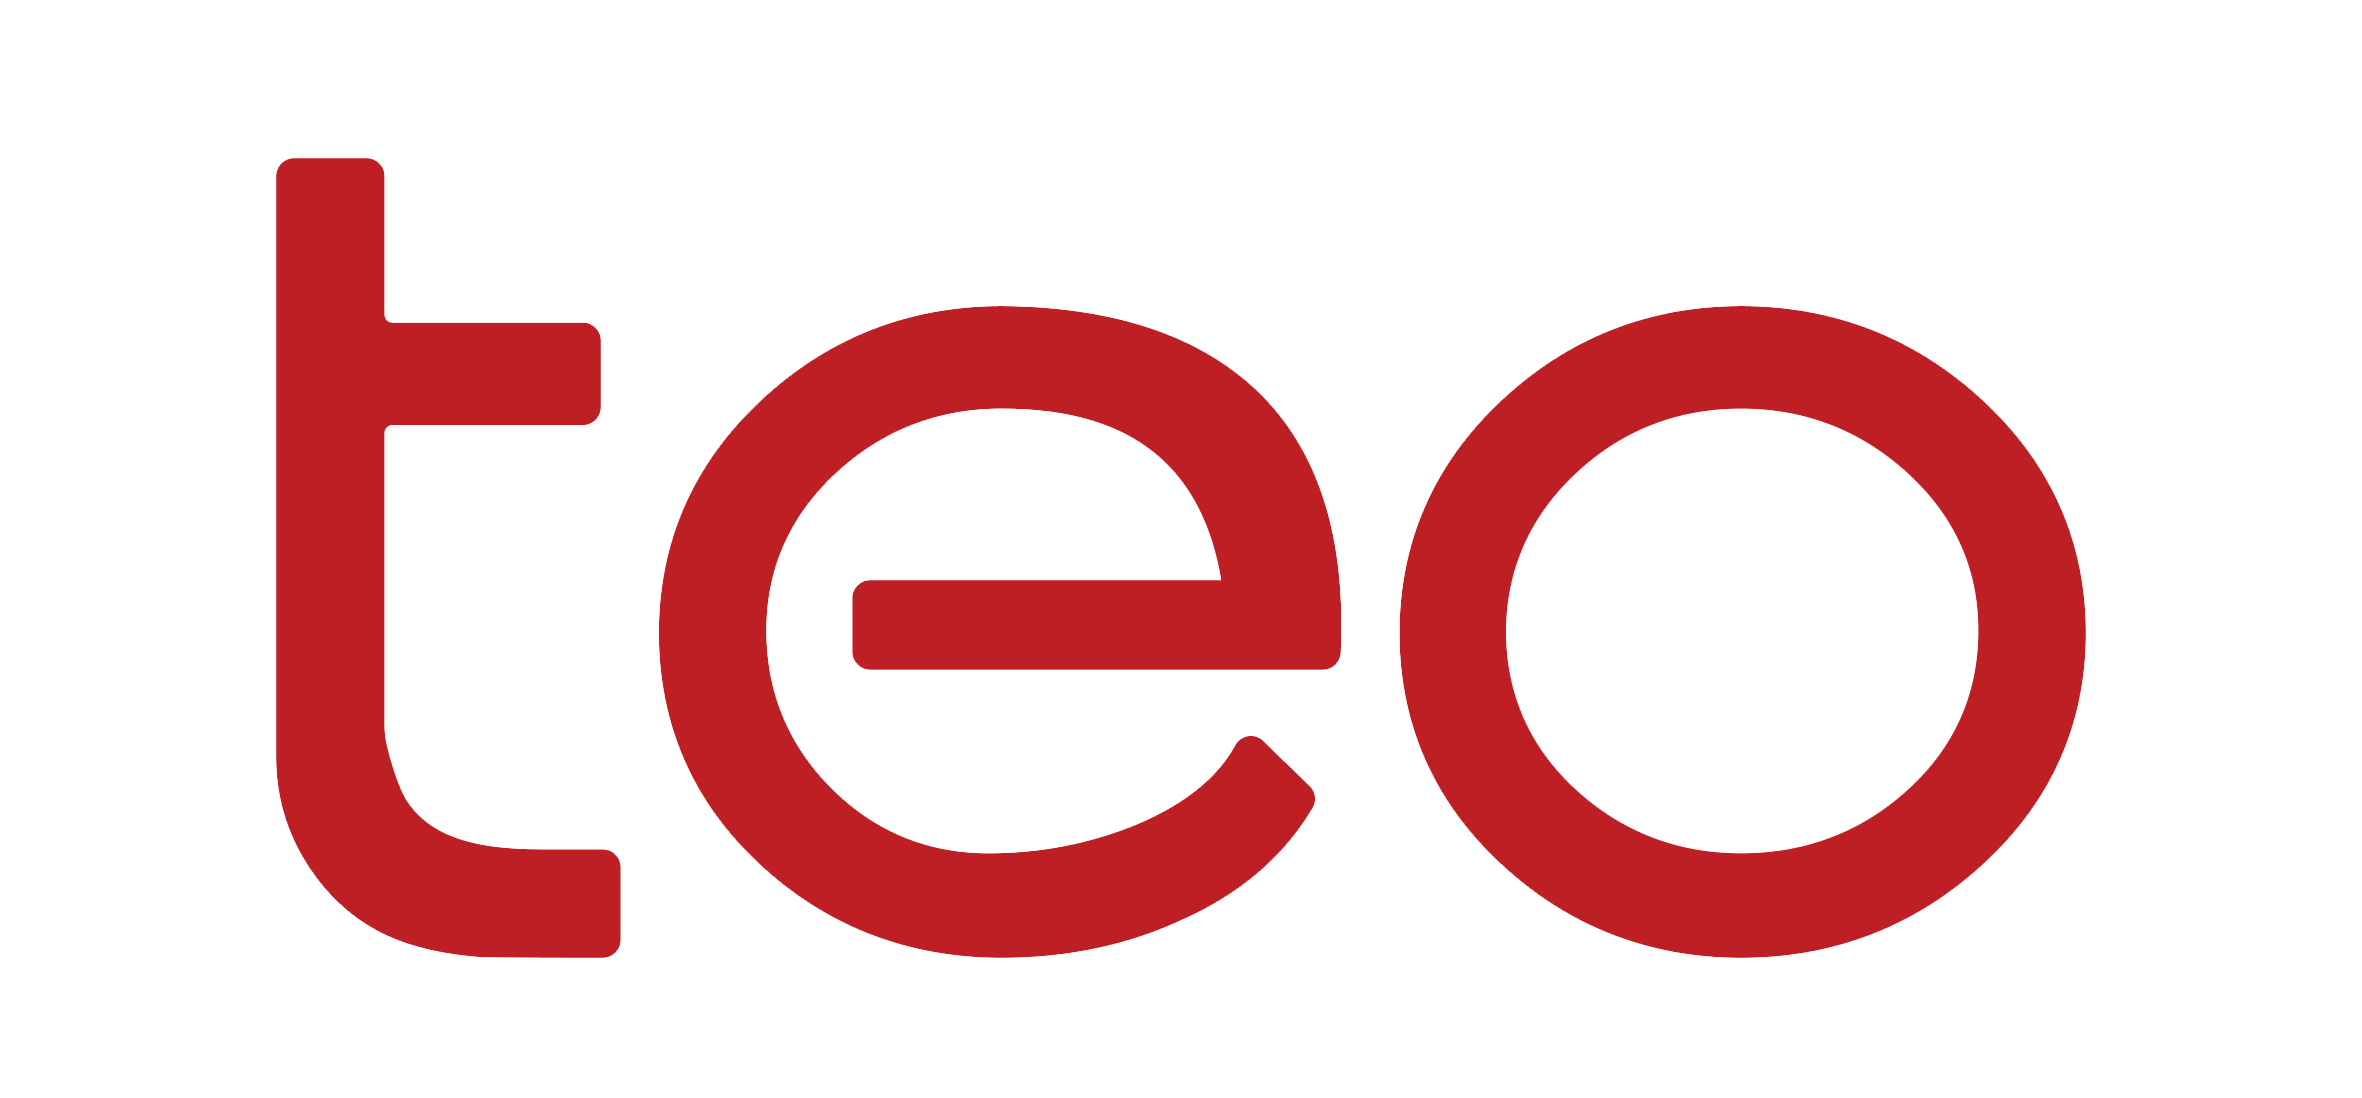 teo logo red on transparent